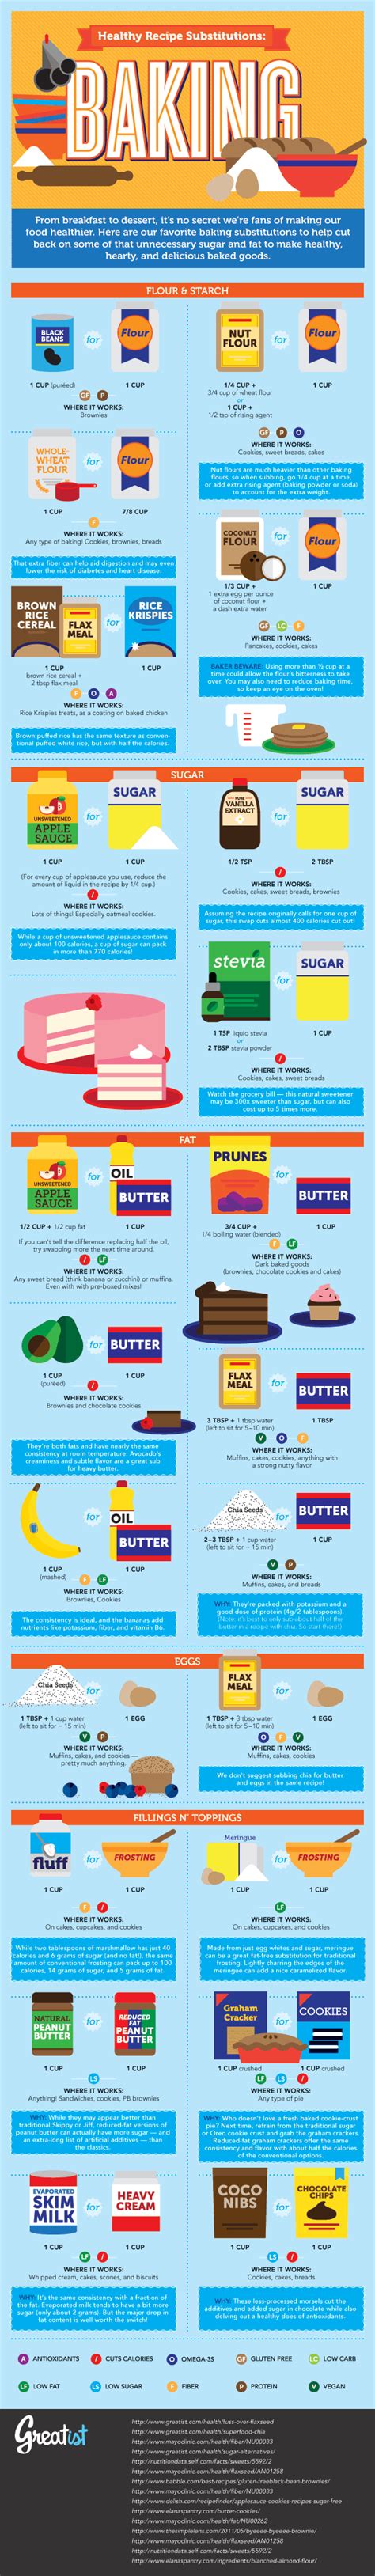 Once your healthy bundt cake is at room temperature, it's time to drizzle and serve! Healthy Baking Swaps to Bake Every Day | Daily Infographic